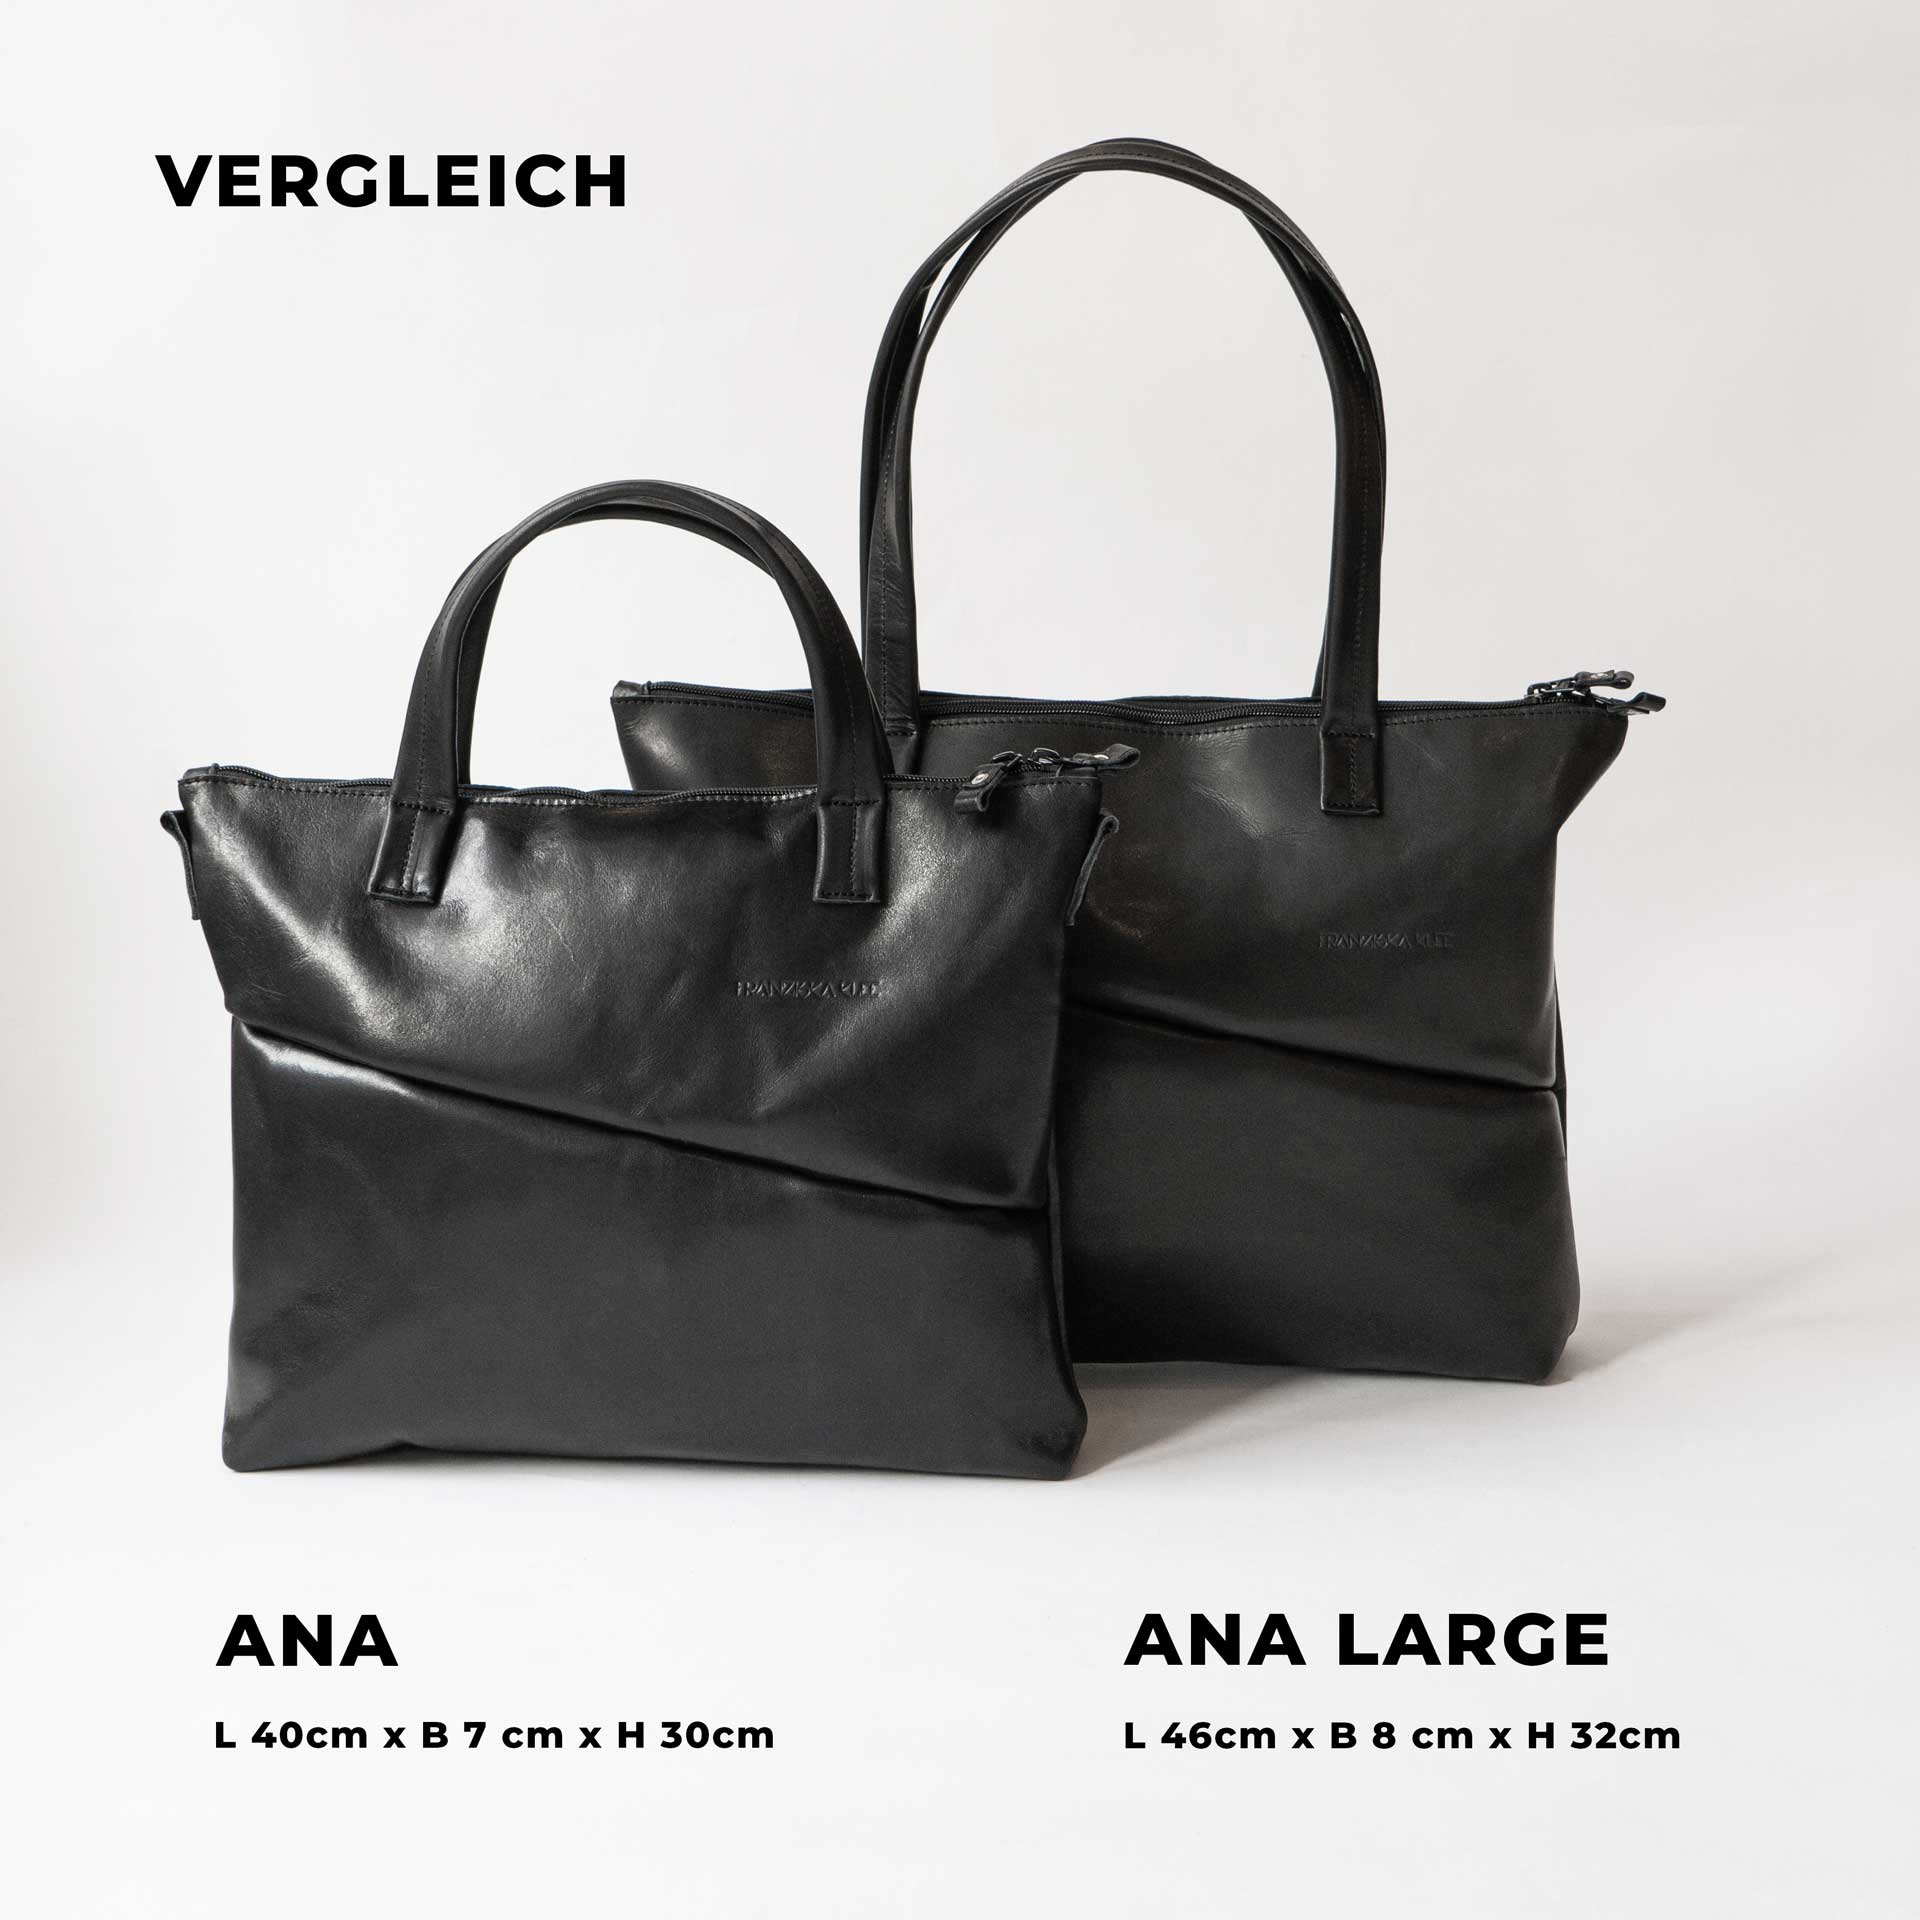 Our bag model ANA is available in two sizes.